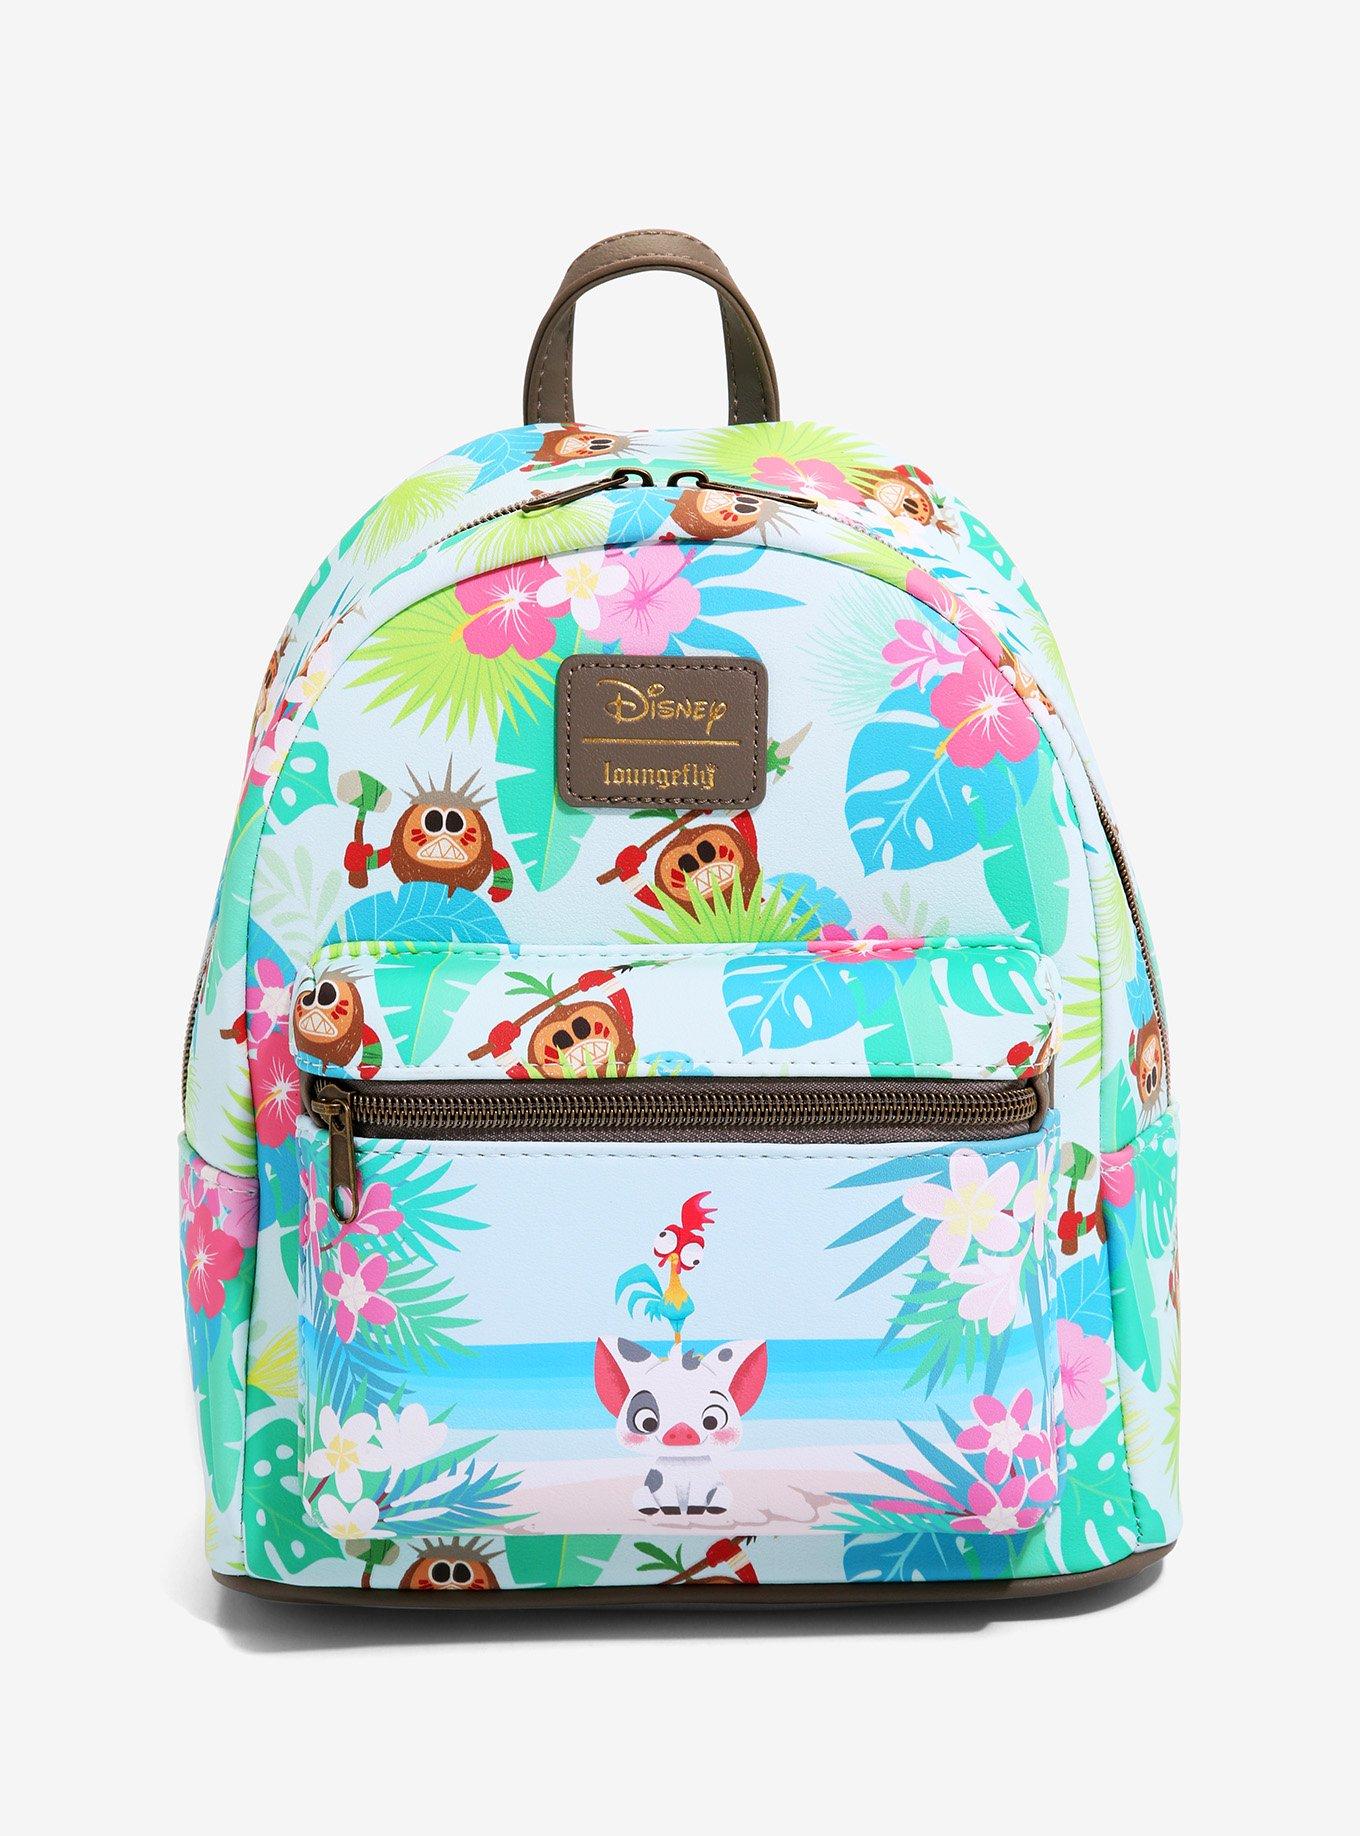 DISNEY - Minnie Mickey Floral - Mini Backpack LoungeFly Exclusive Ed :  : Bag Loungefly DISNEY